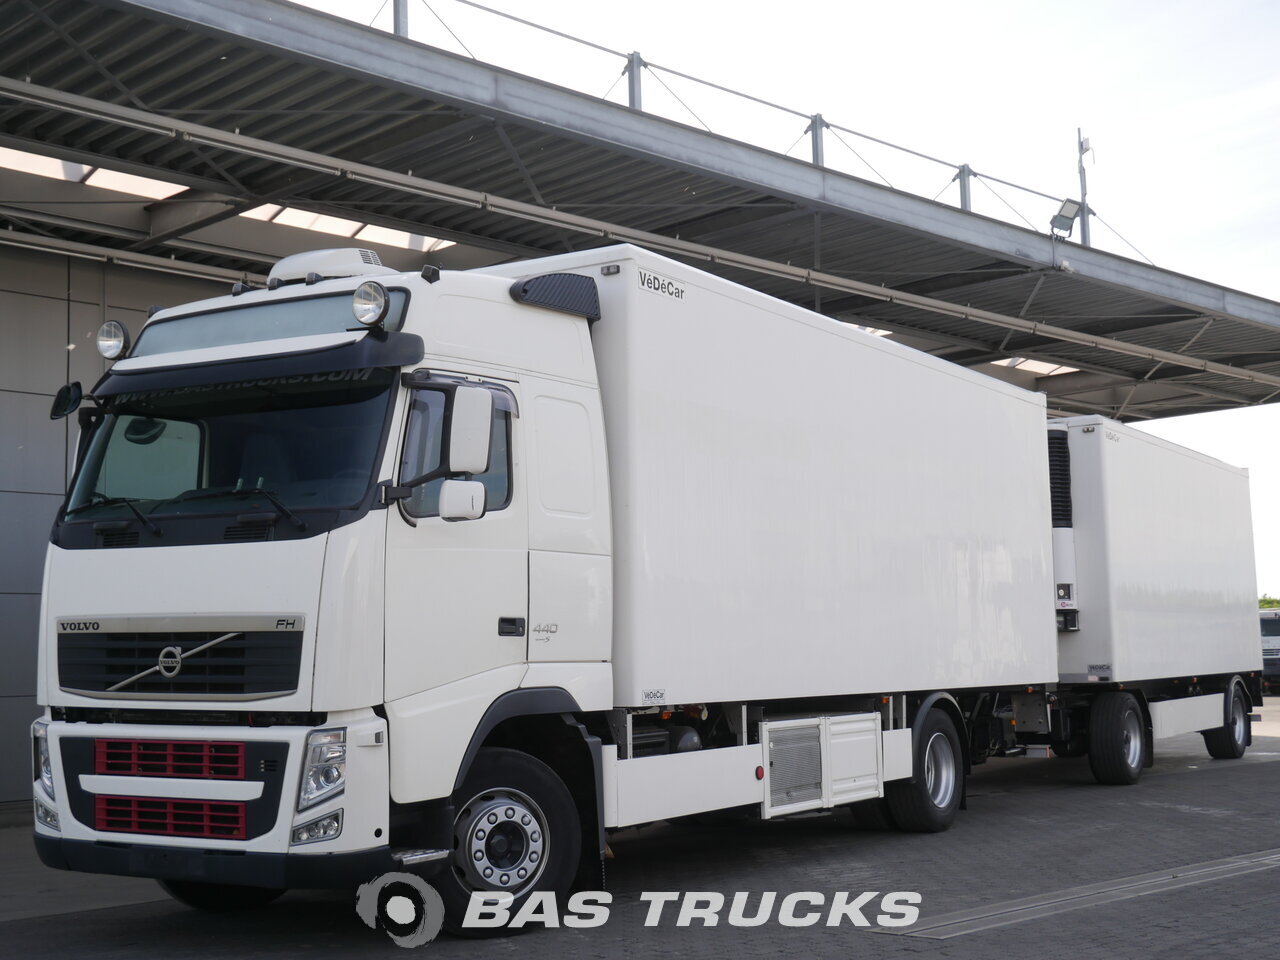 For Sale At Bas Trucks Volvo Fh 440 4x2 03 2009